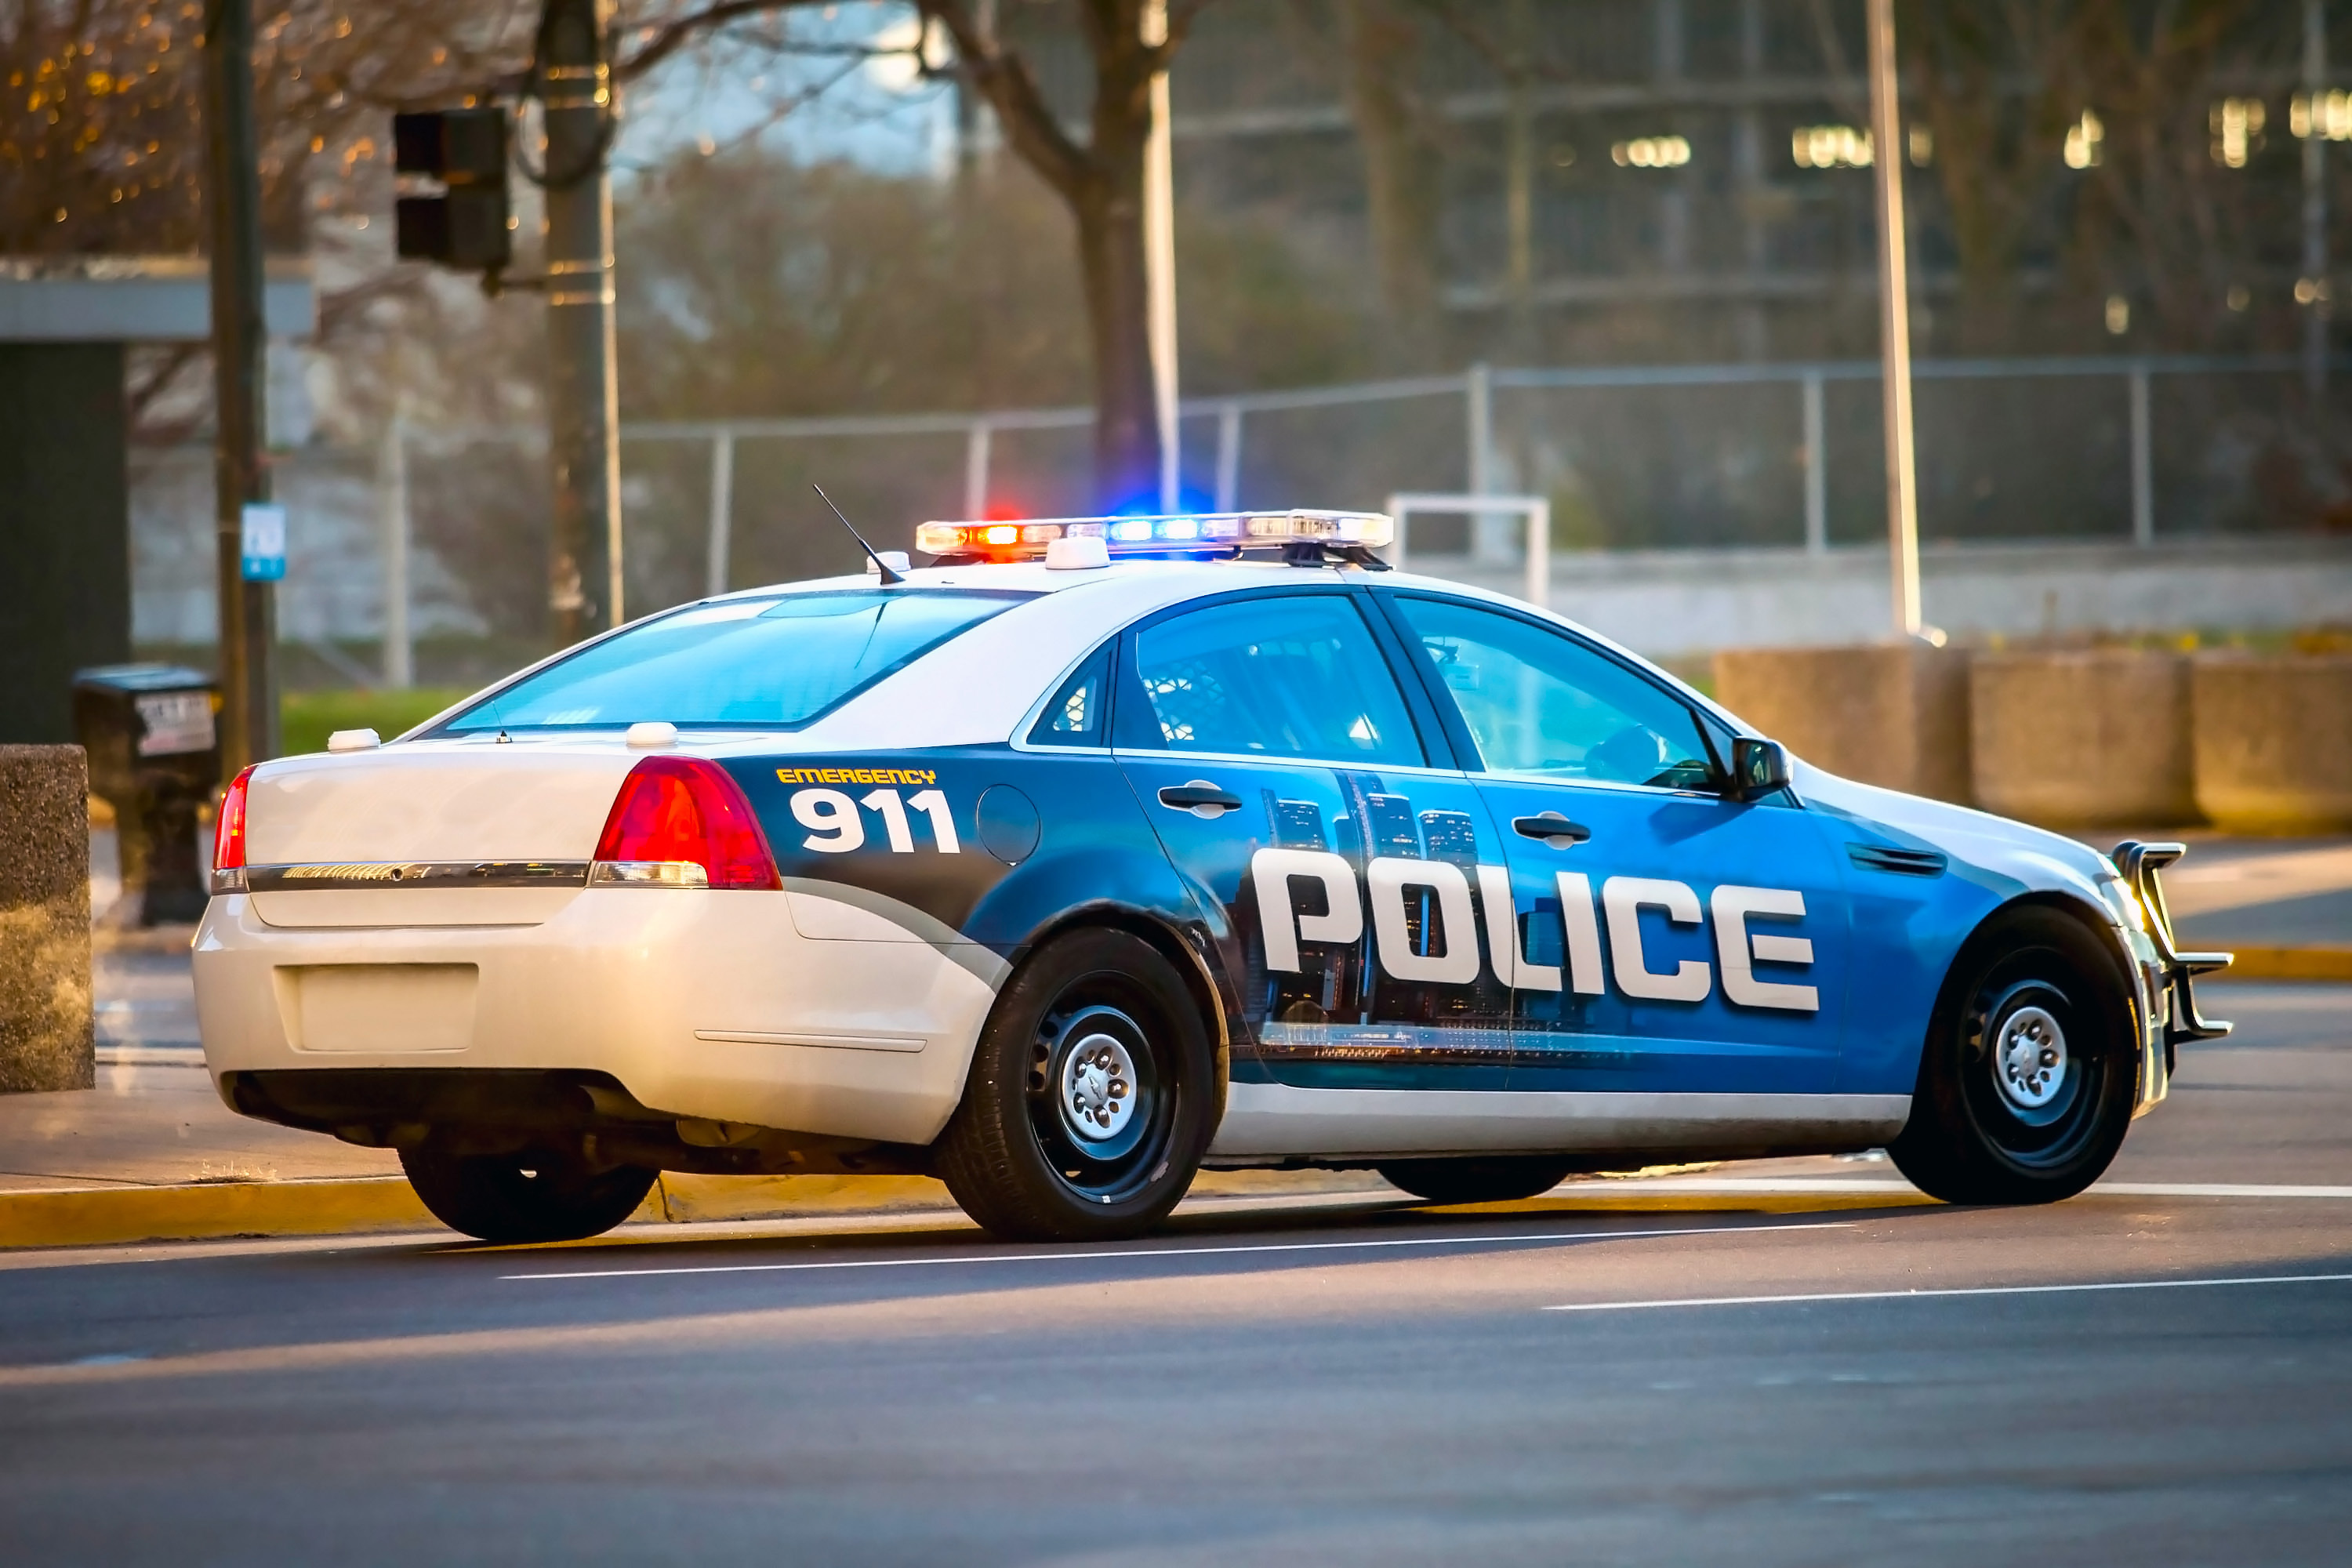 A police car on the road | Source: Shutterstock